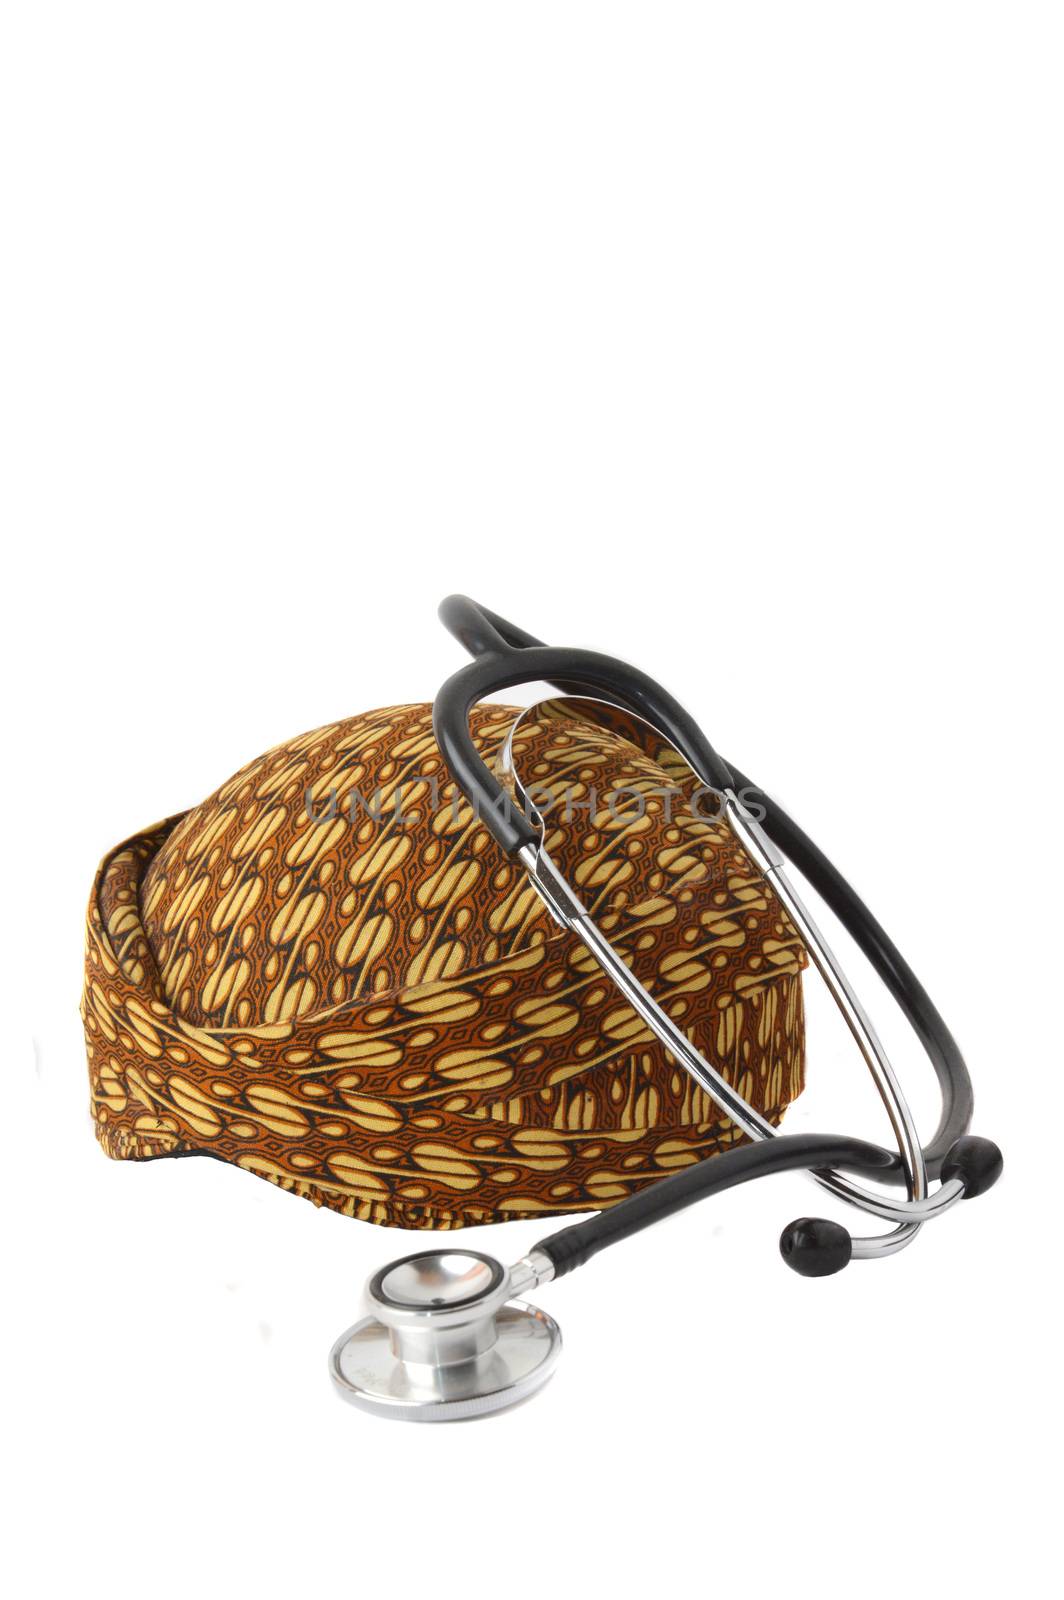 blangkon a traditional hat Javanese men with stethoscope on white background